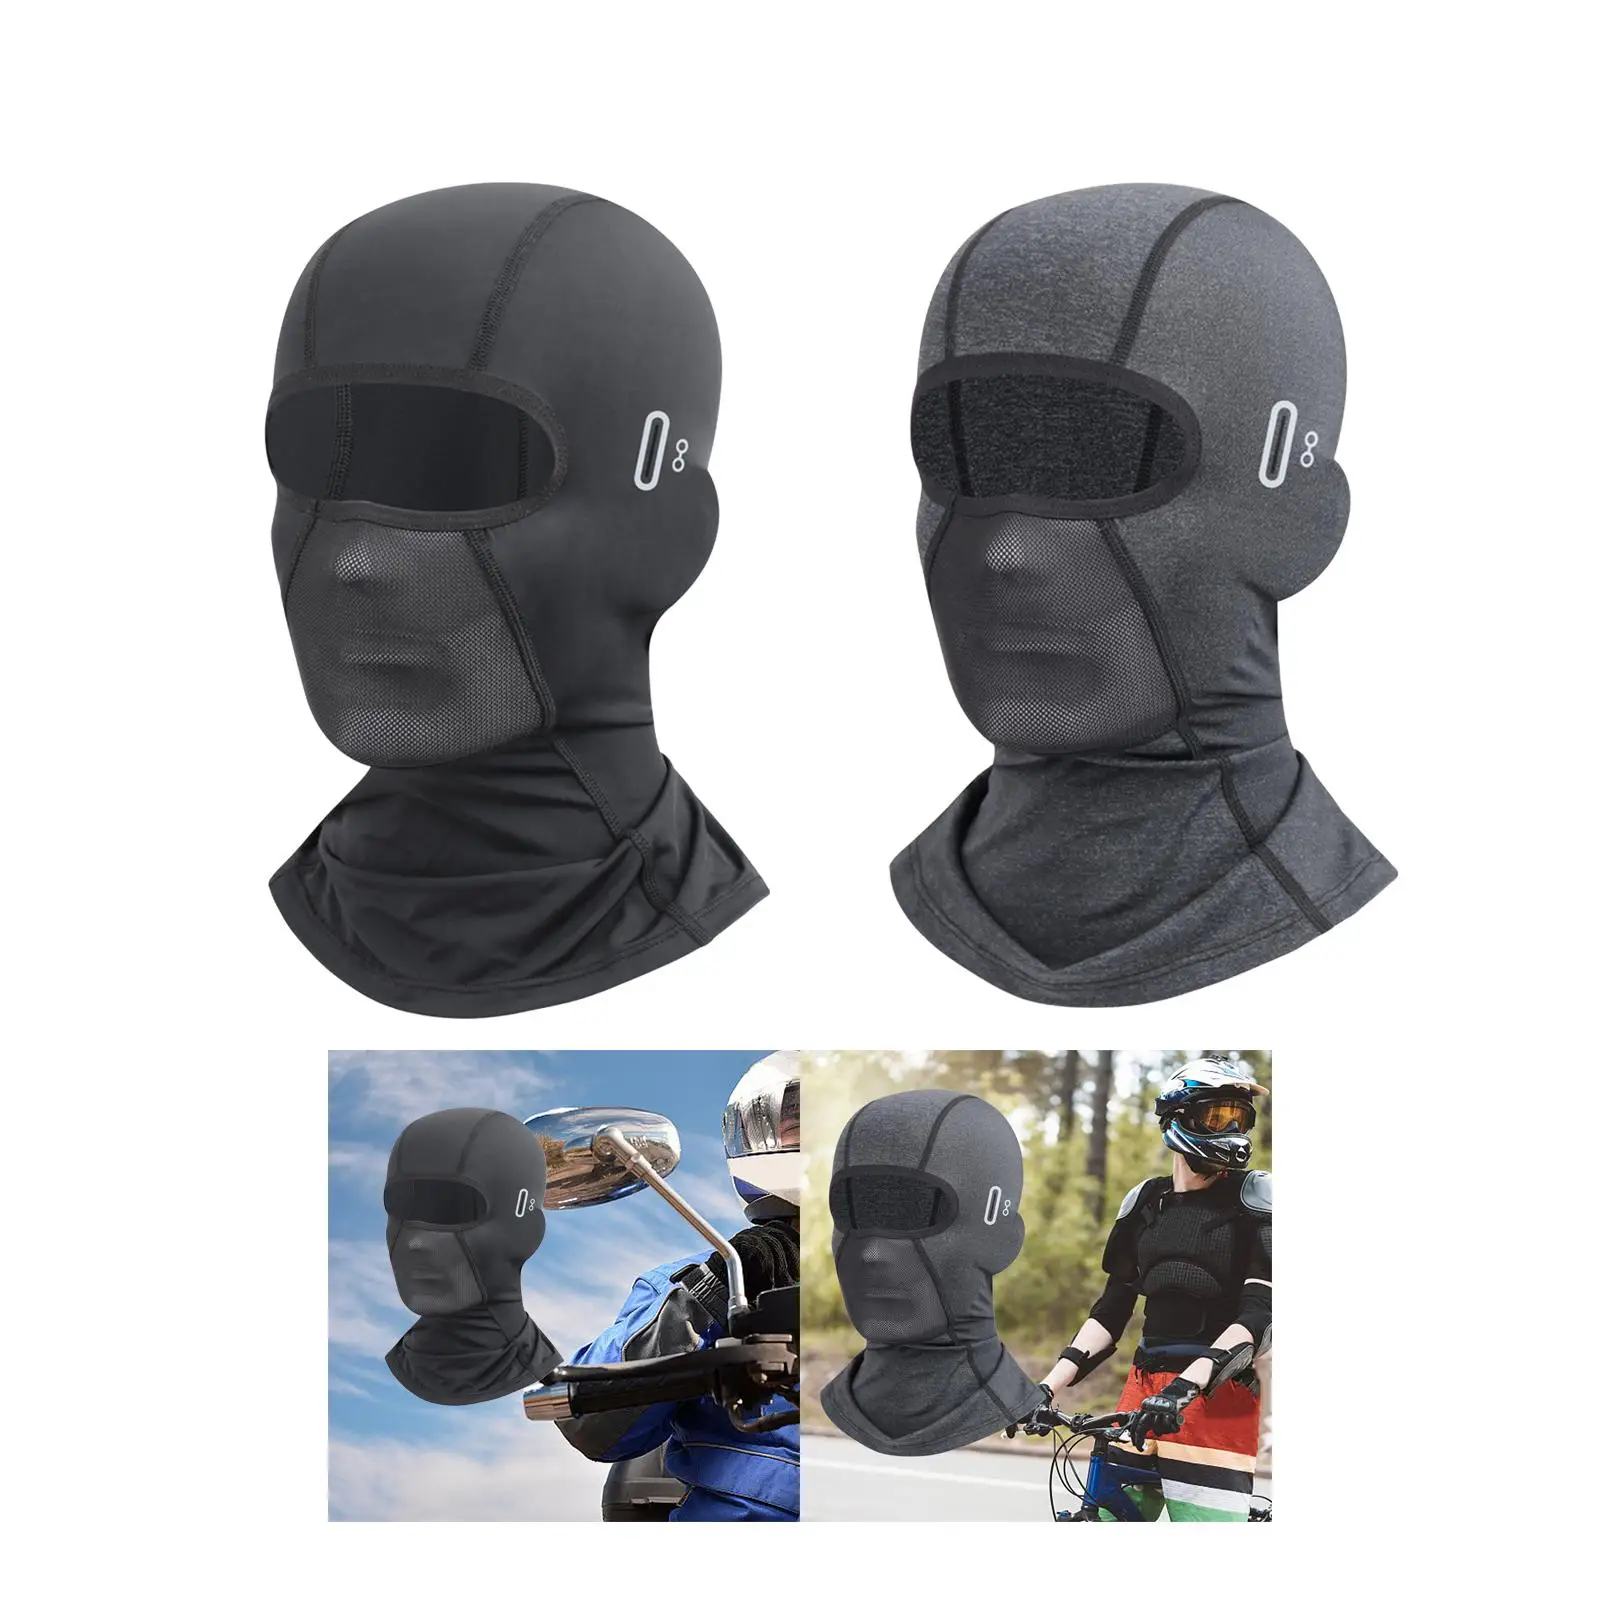 Balaclava Face Mask Cooling Breathable Ski Mask Neck Gaiter Motorcycle Scarf for Skiing Motorcycle Snowboarding Outdoor Riding